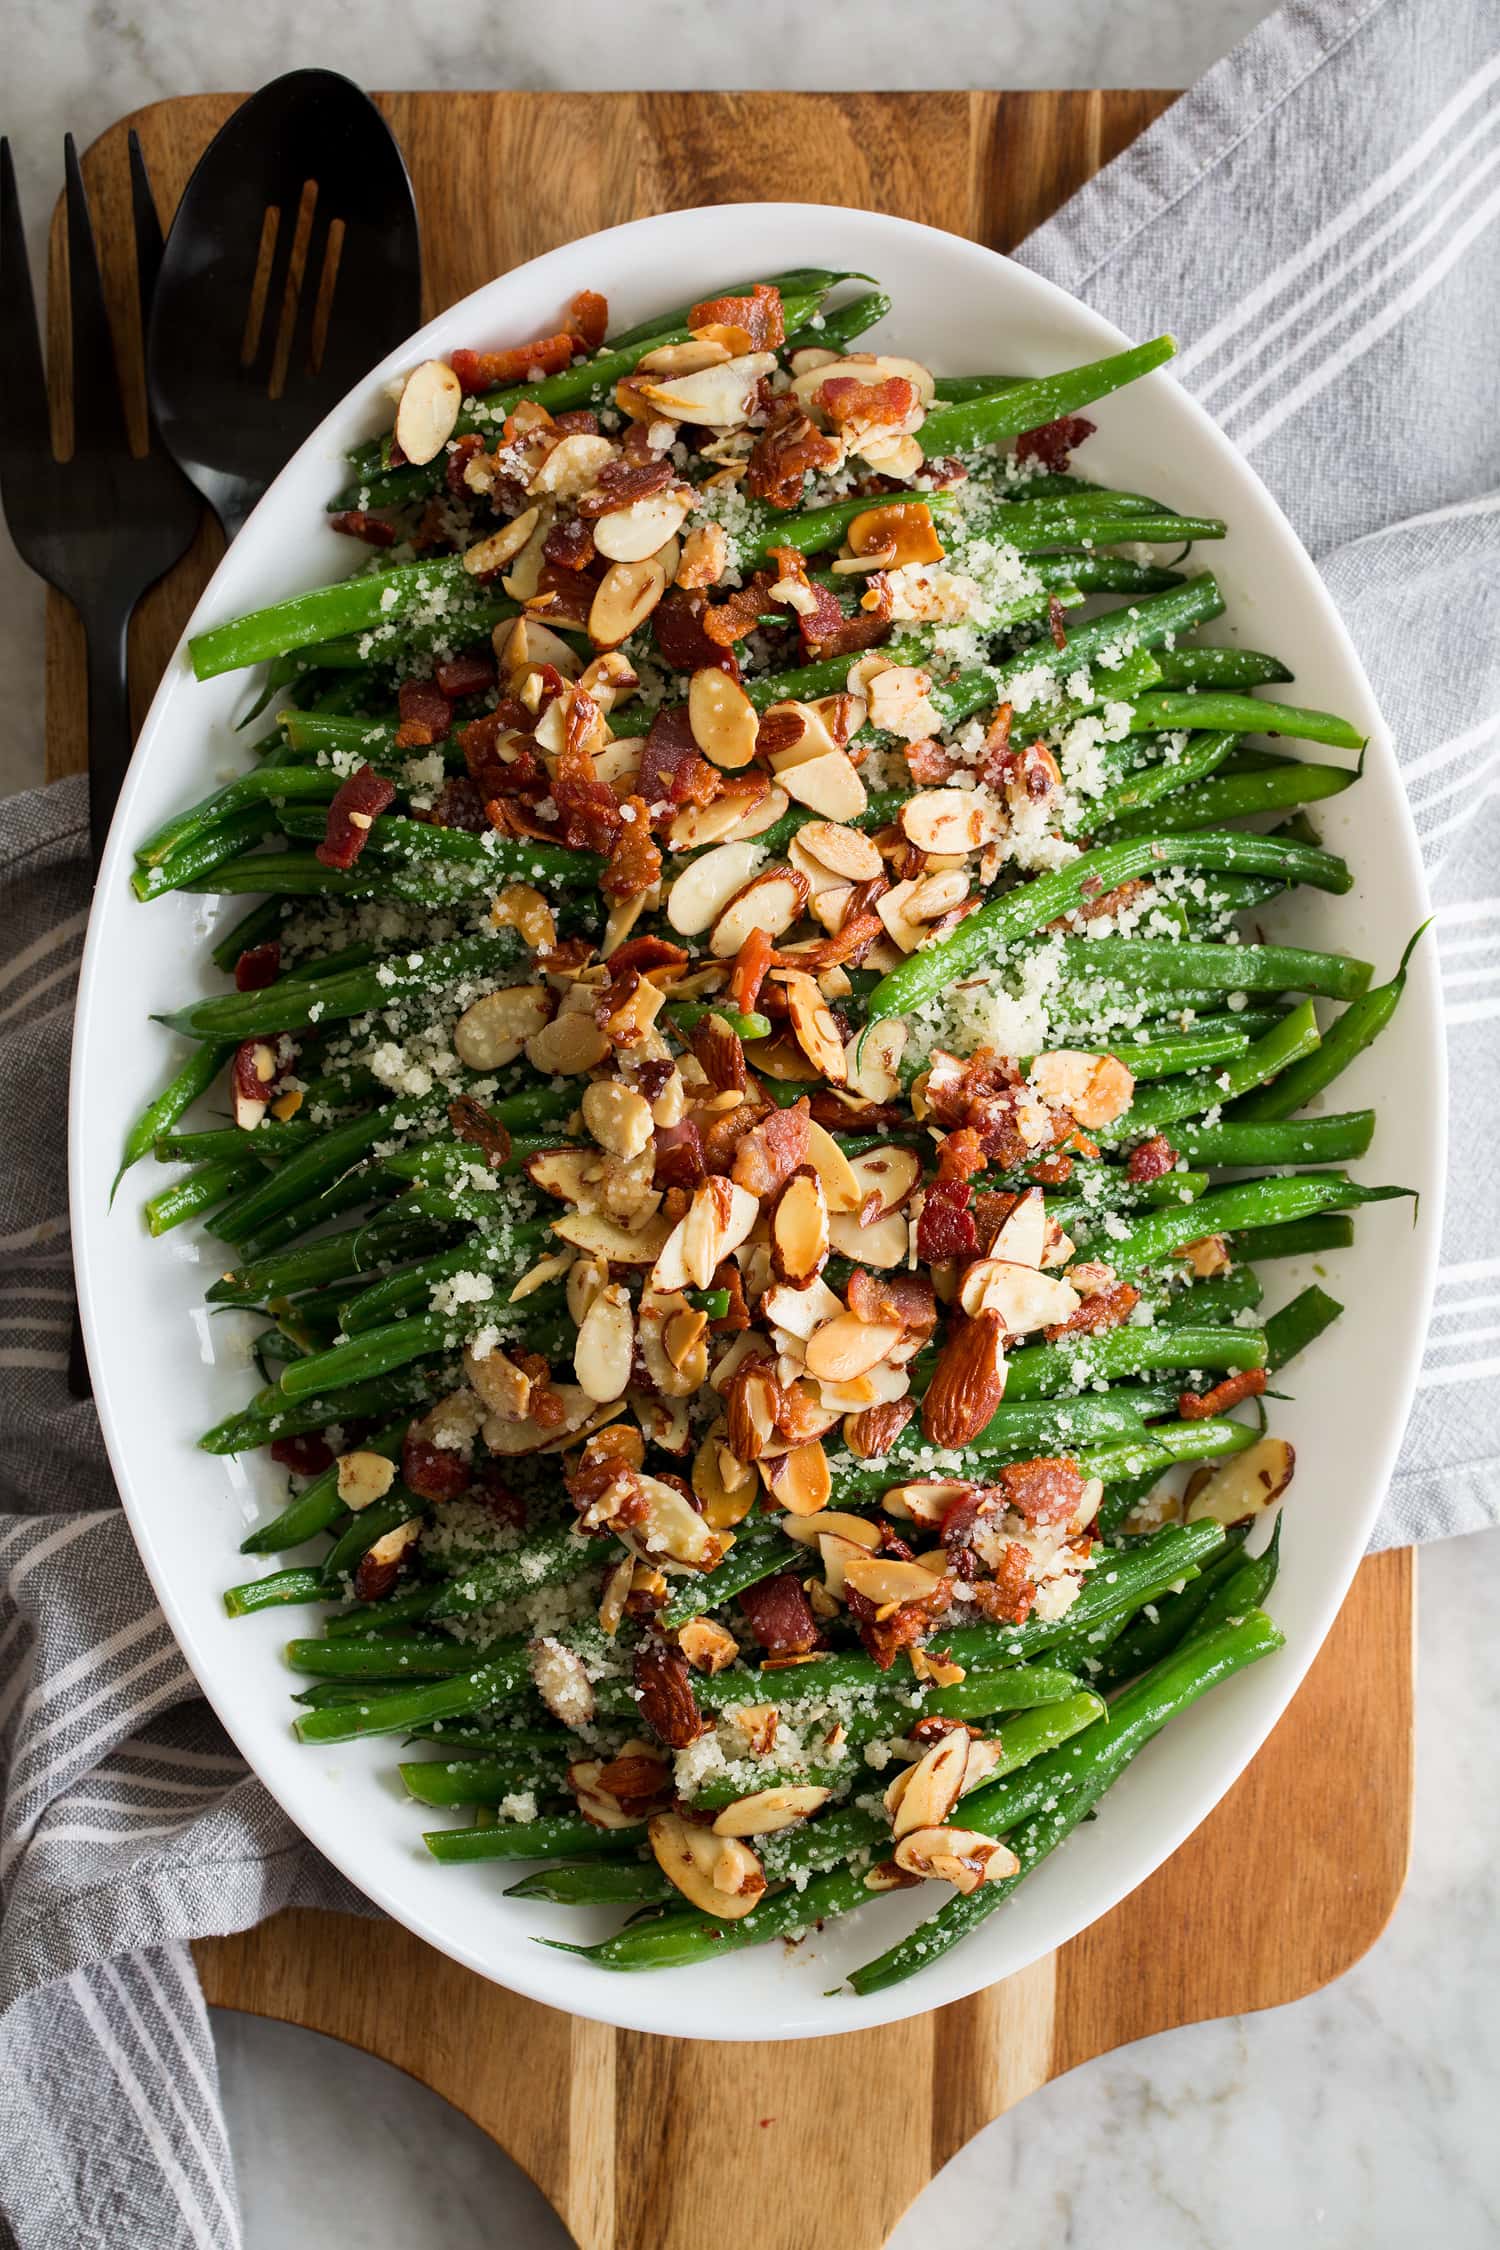 Beautiful Green Bean Almondine. Sauteed green beans are shown lined up in a row on a platter with toasted almonds, crumbled fried bacon and grated parmesan are sprinkled over the top.